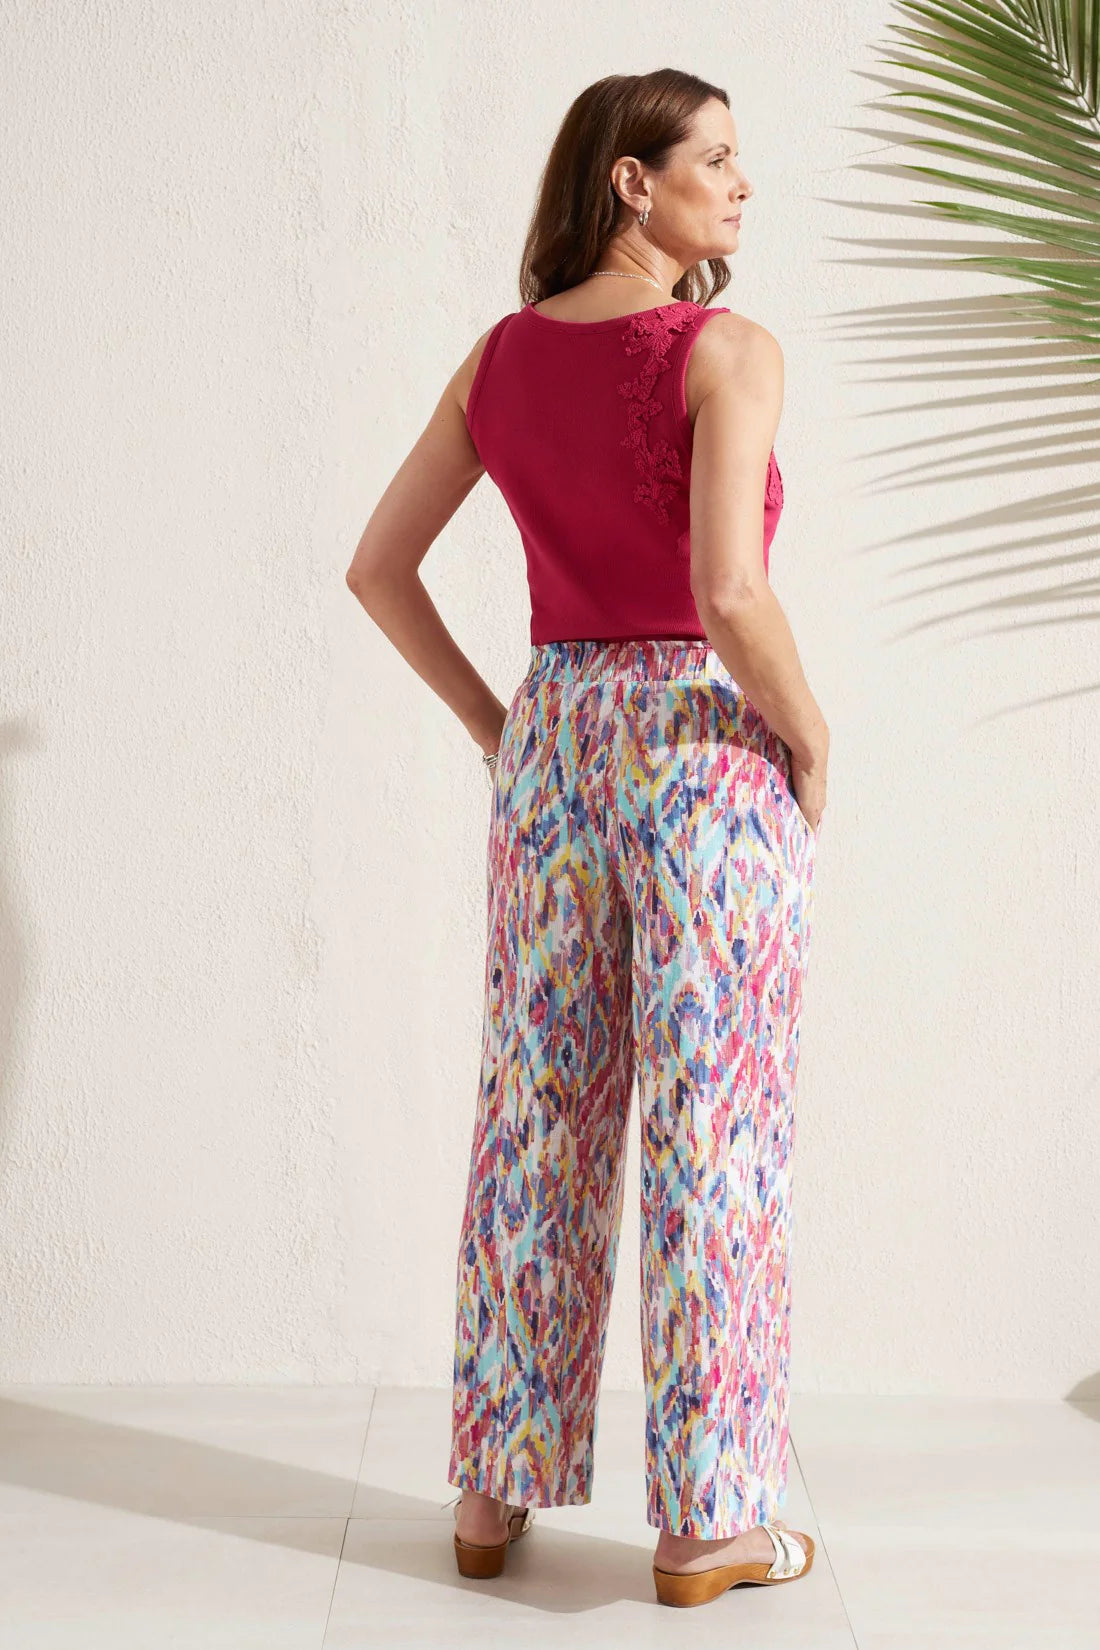 Slide into these pull-on ankle pants rocking a lively print that brings bold colour to basic outfits. 